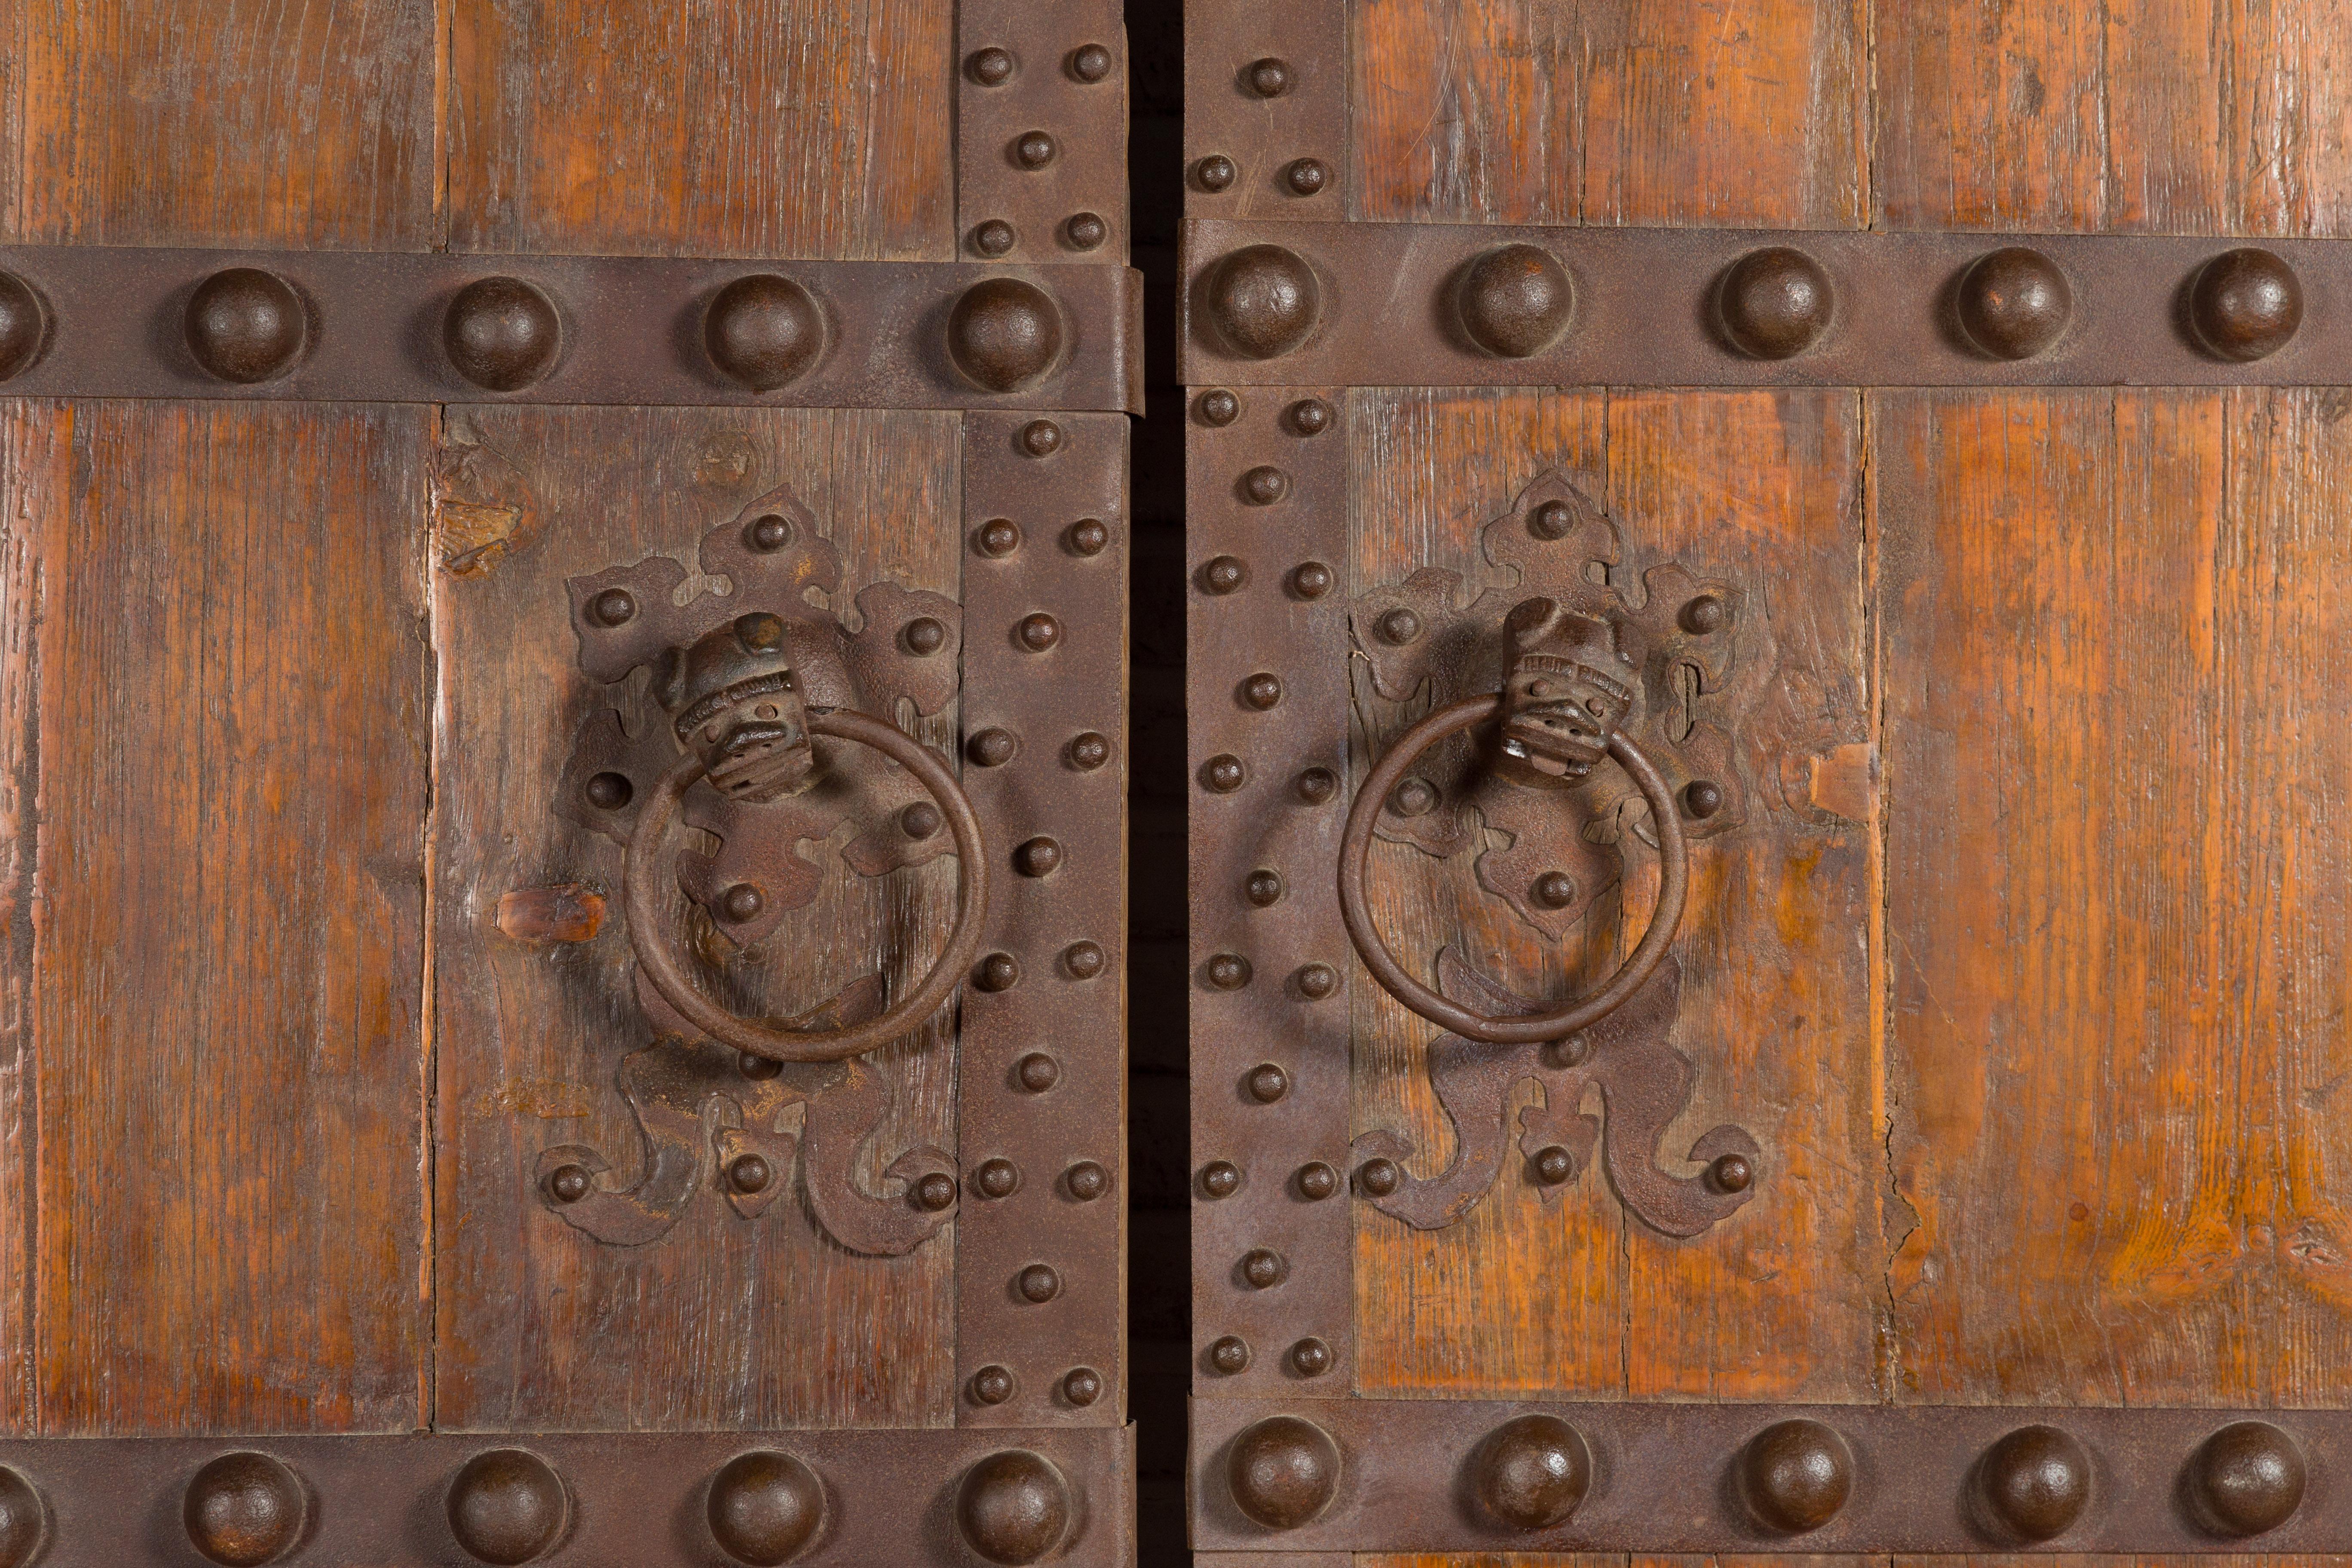 Wood Pair of Chinese Qing Dynasty Palace Doors with Iron Hardware and Dark Patina